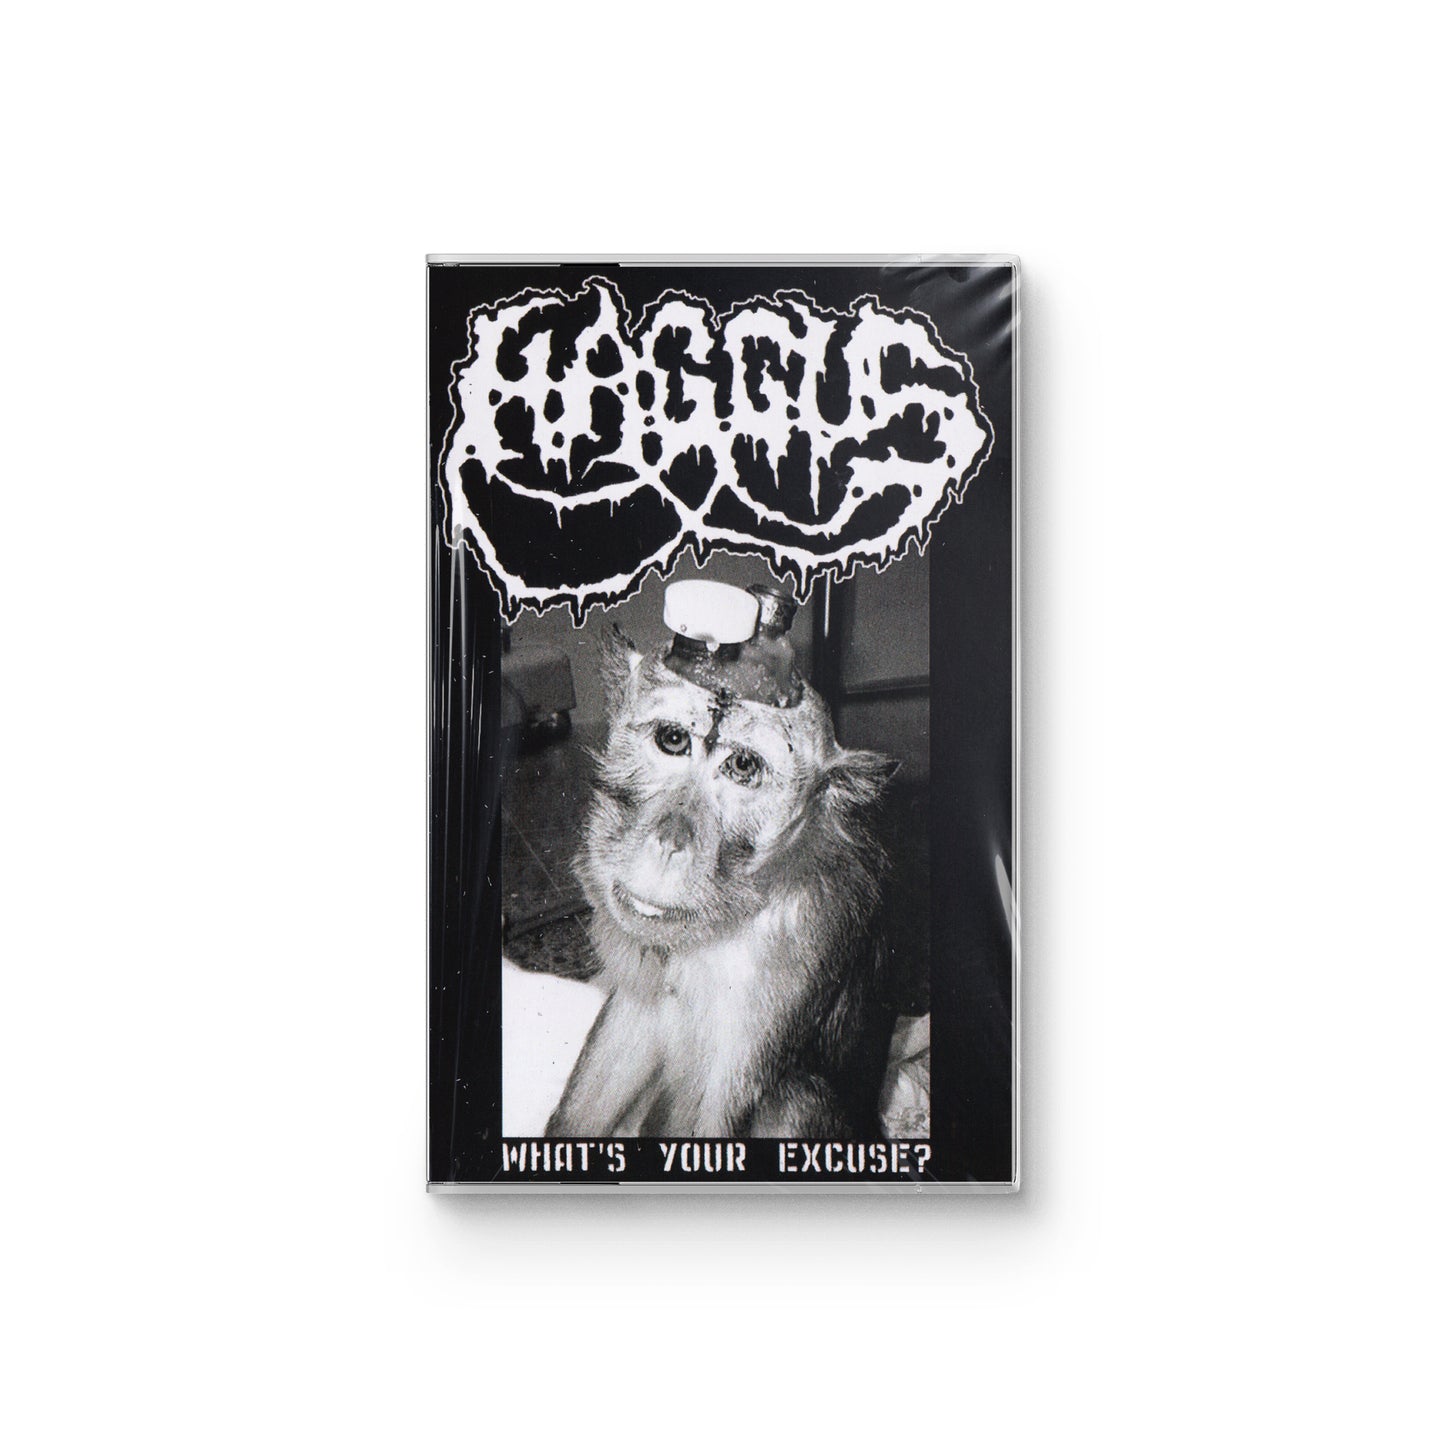 Haggus "What's Your Excuse?" CASSETTE